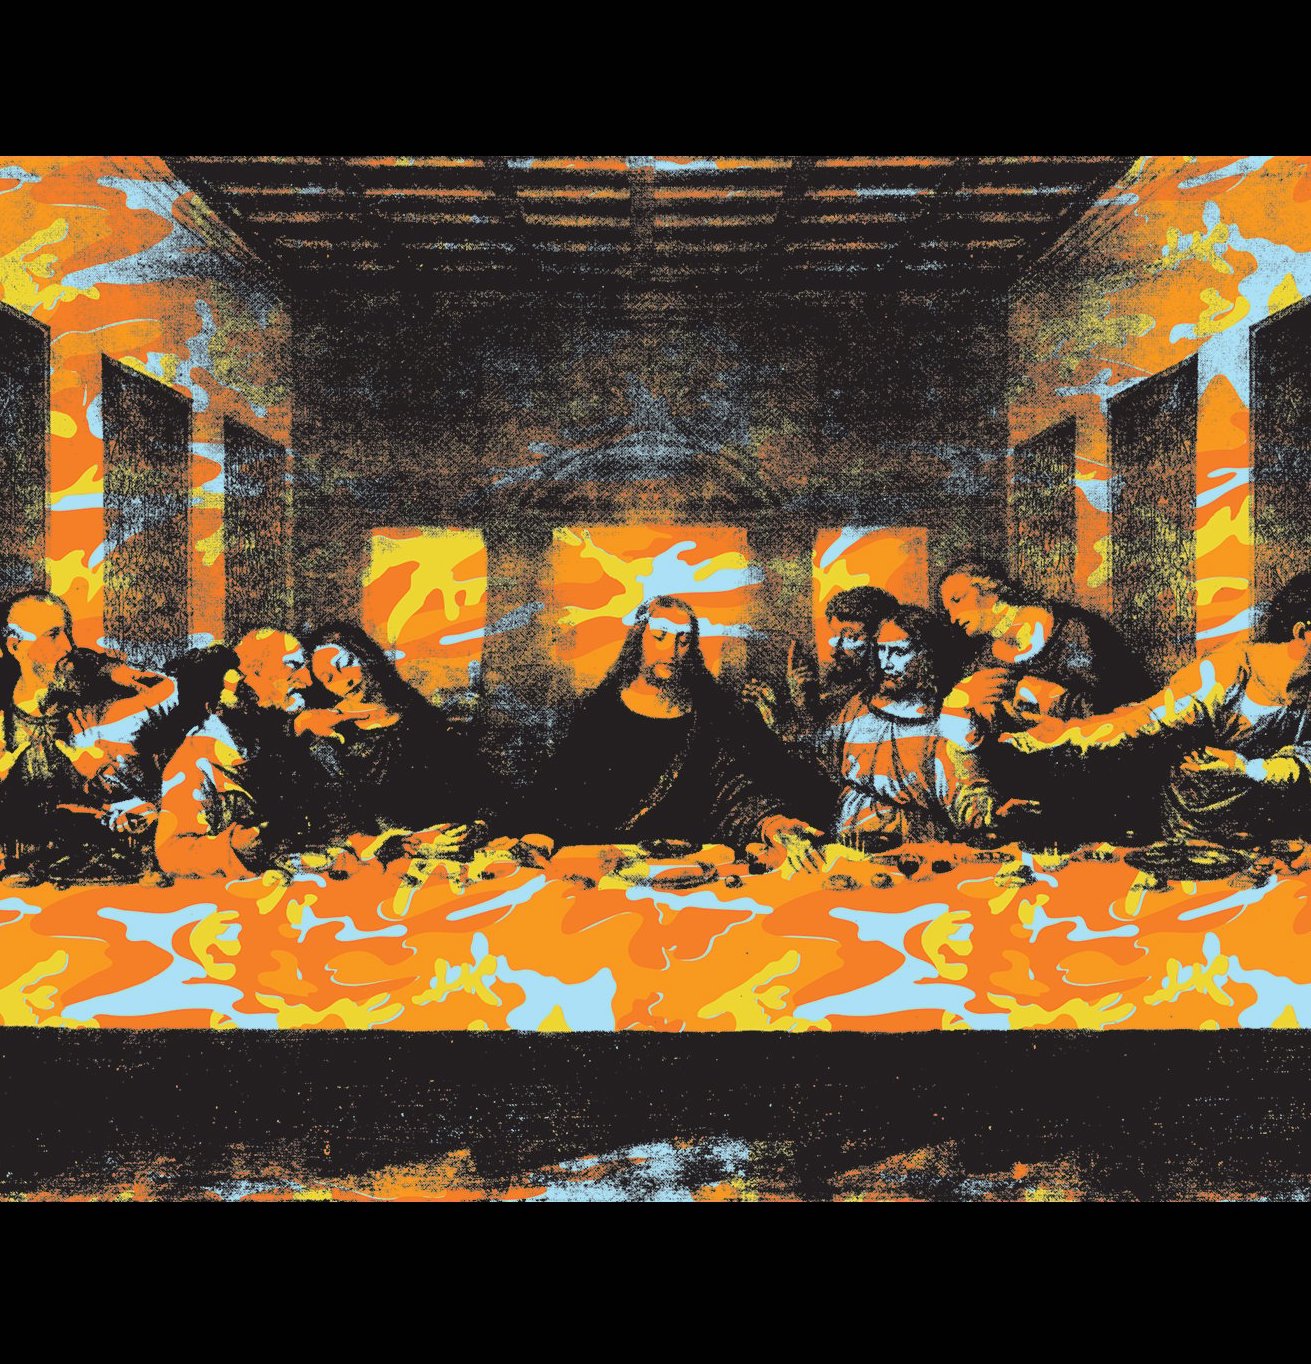 The-Last-Supper-Mural---Orchard.jpg